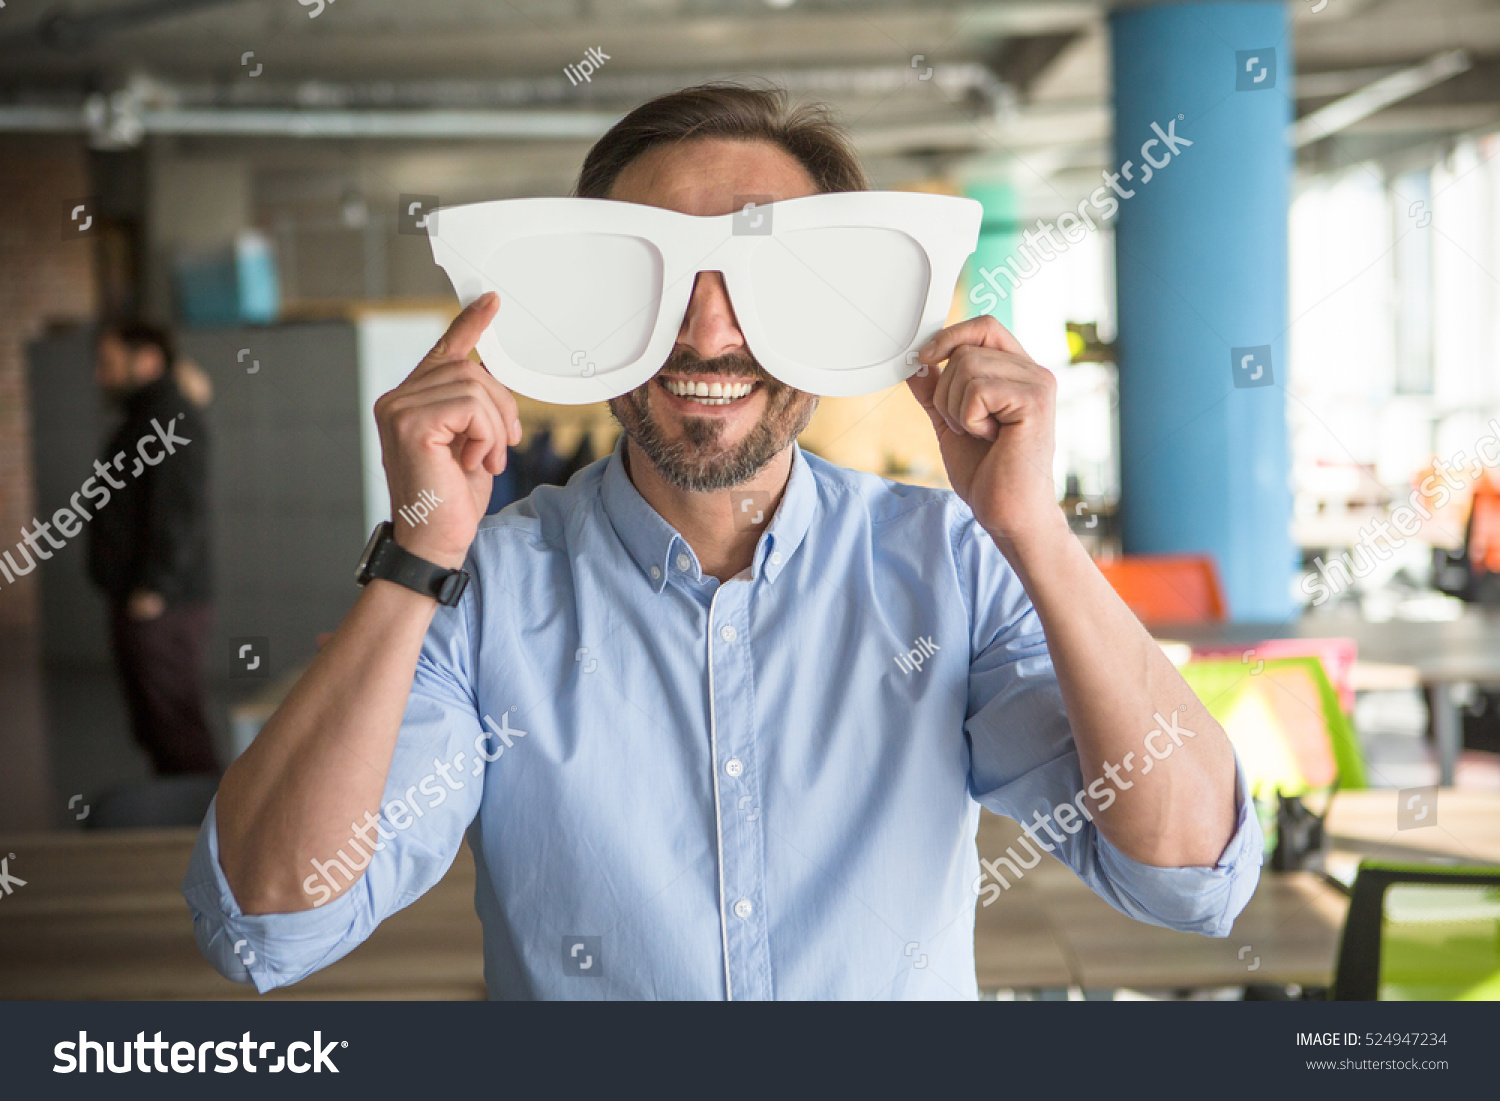 Happy businessman with funny glasses on showing to camera. Handsome happy man joking during work. Break time concept. #524947234